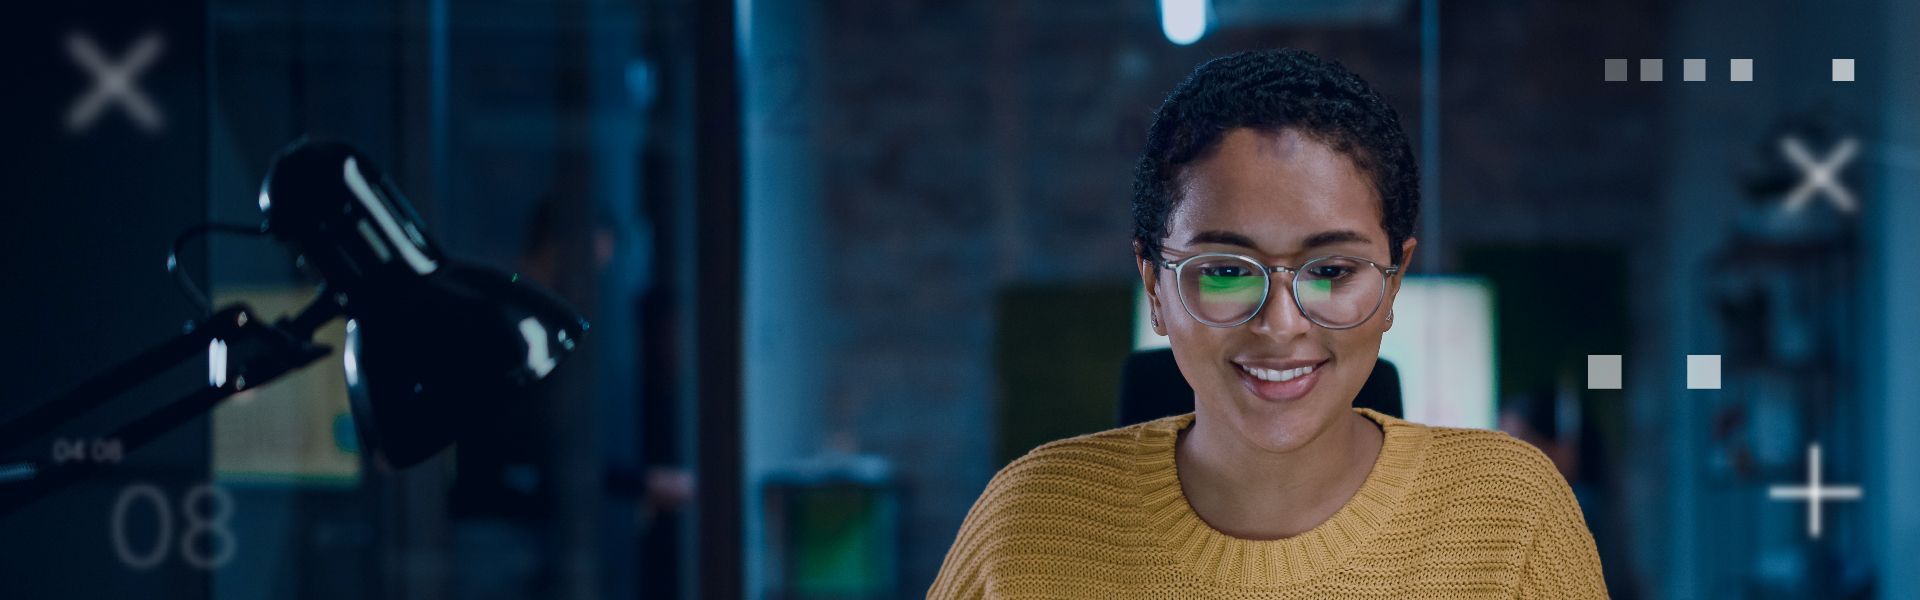 Tech professional girl with glasses smiling